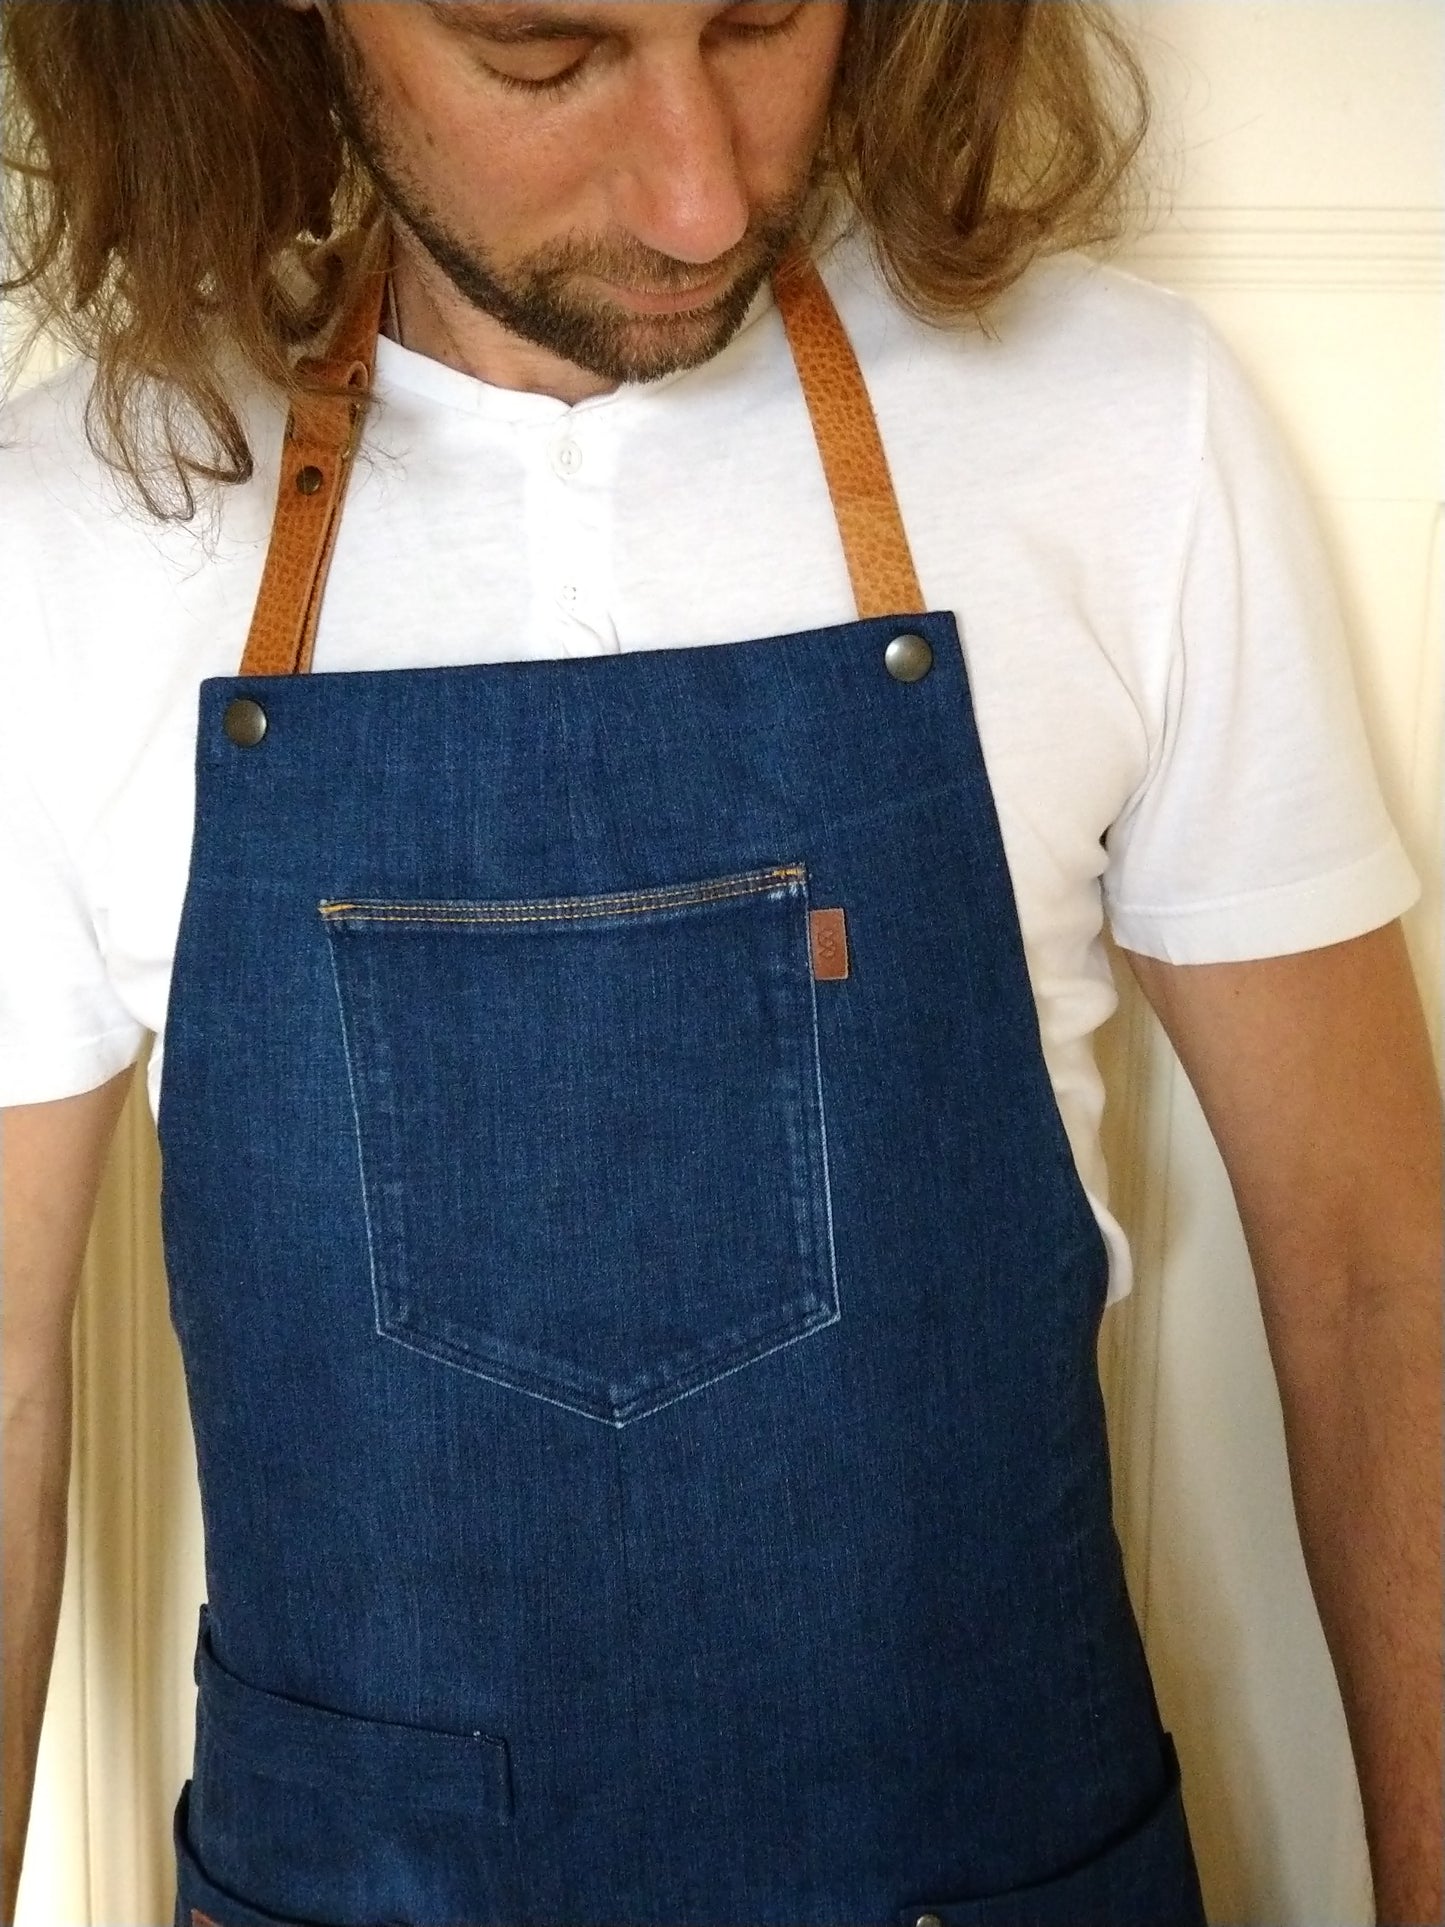 Cooking apron / grill apron made of denim medium blue with removable leather straps